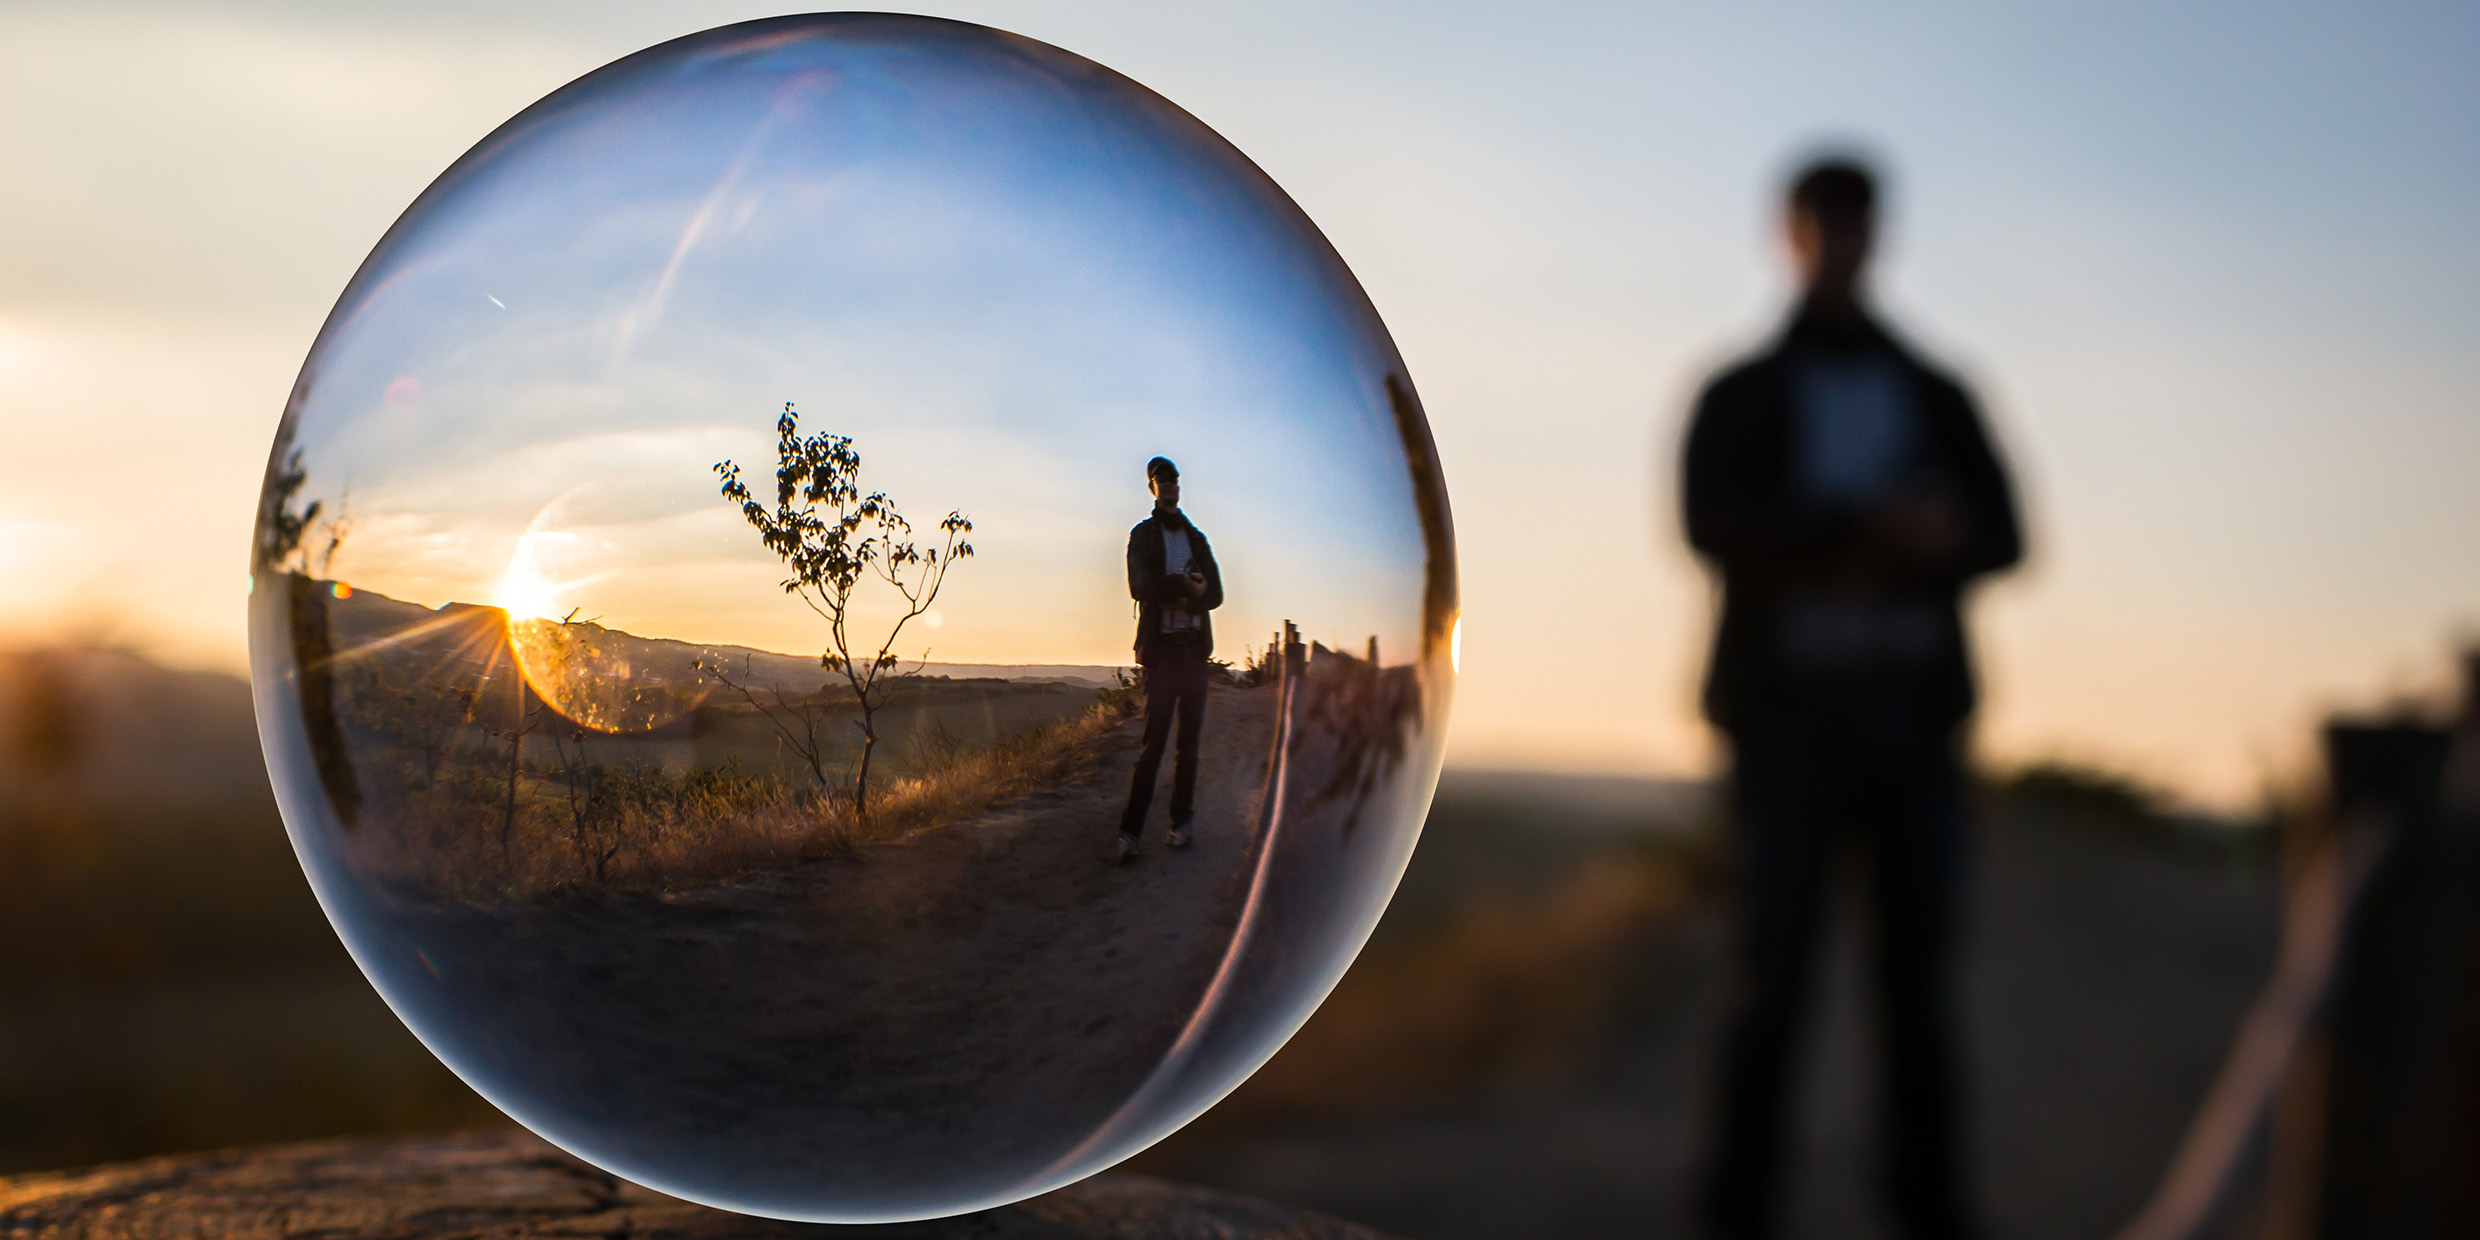 Image of standing man with his image refracted inside a glass sphere